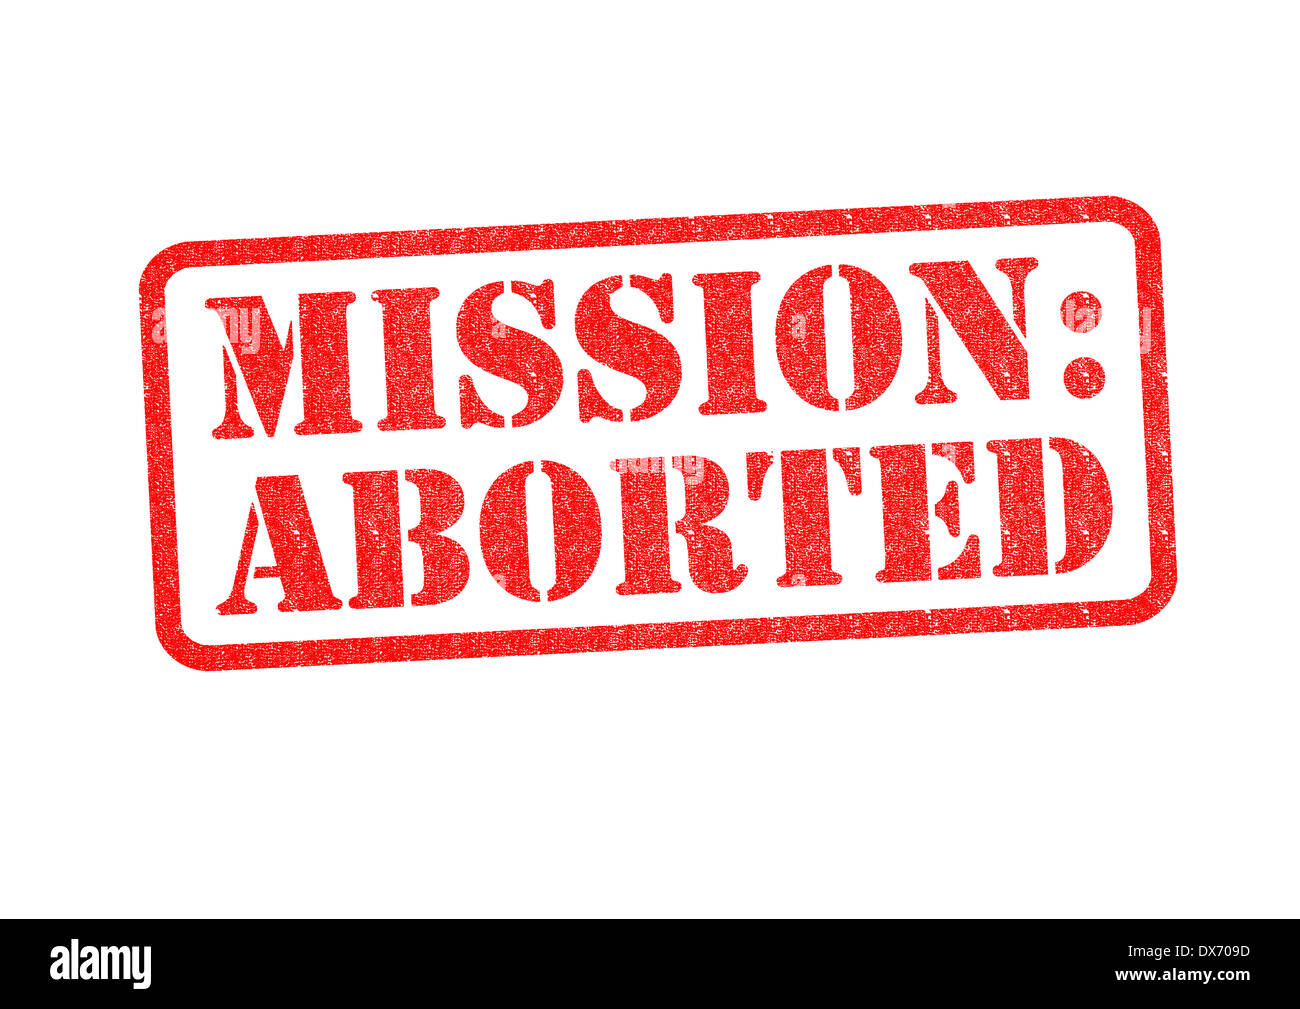 MISSION: ABORTED Rubber Stamp over a white background. Stock Photo